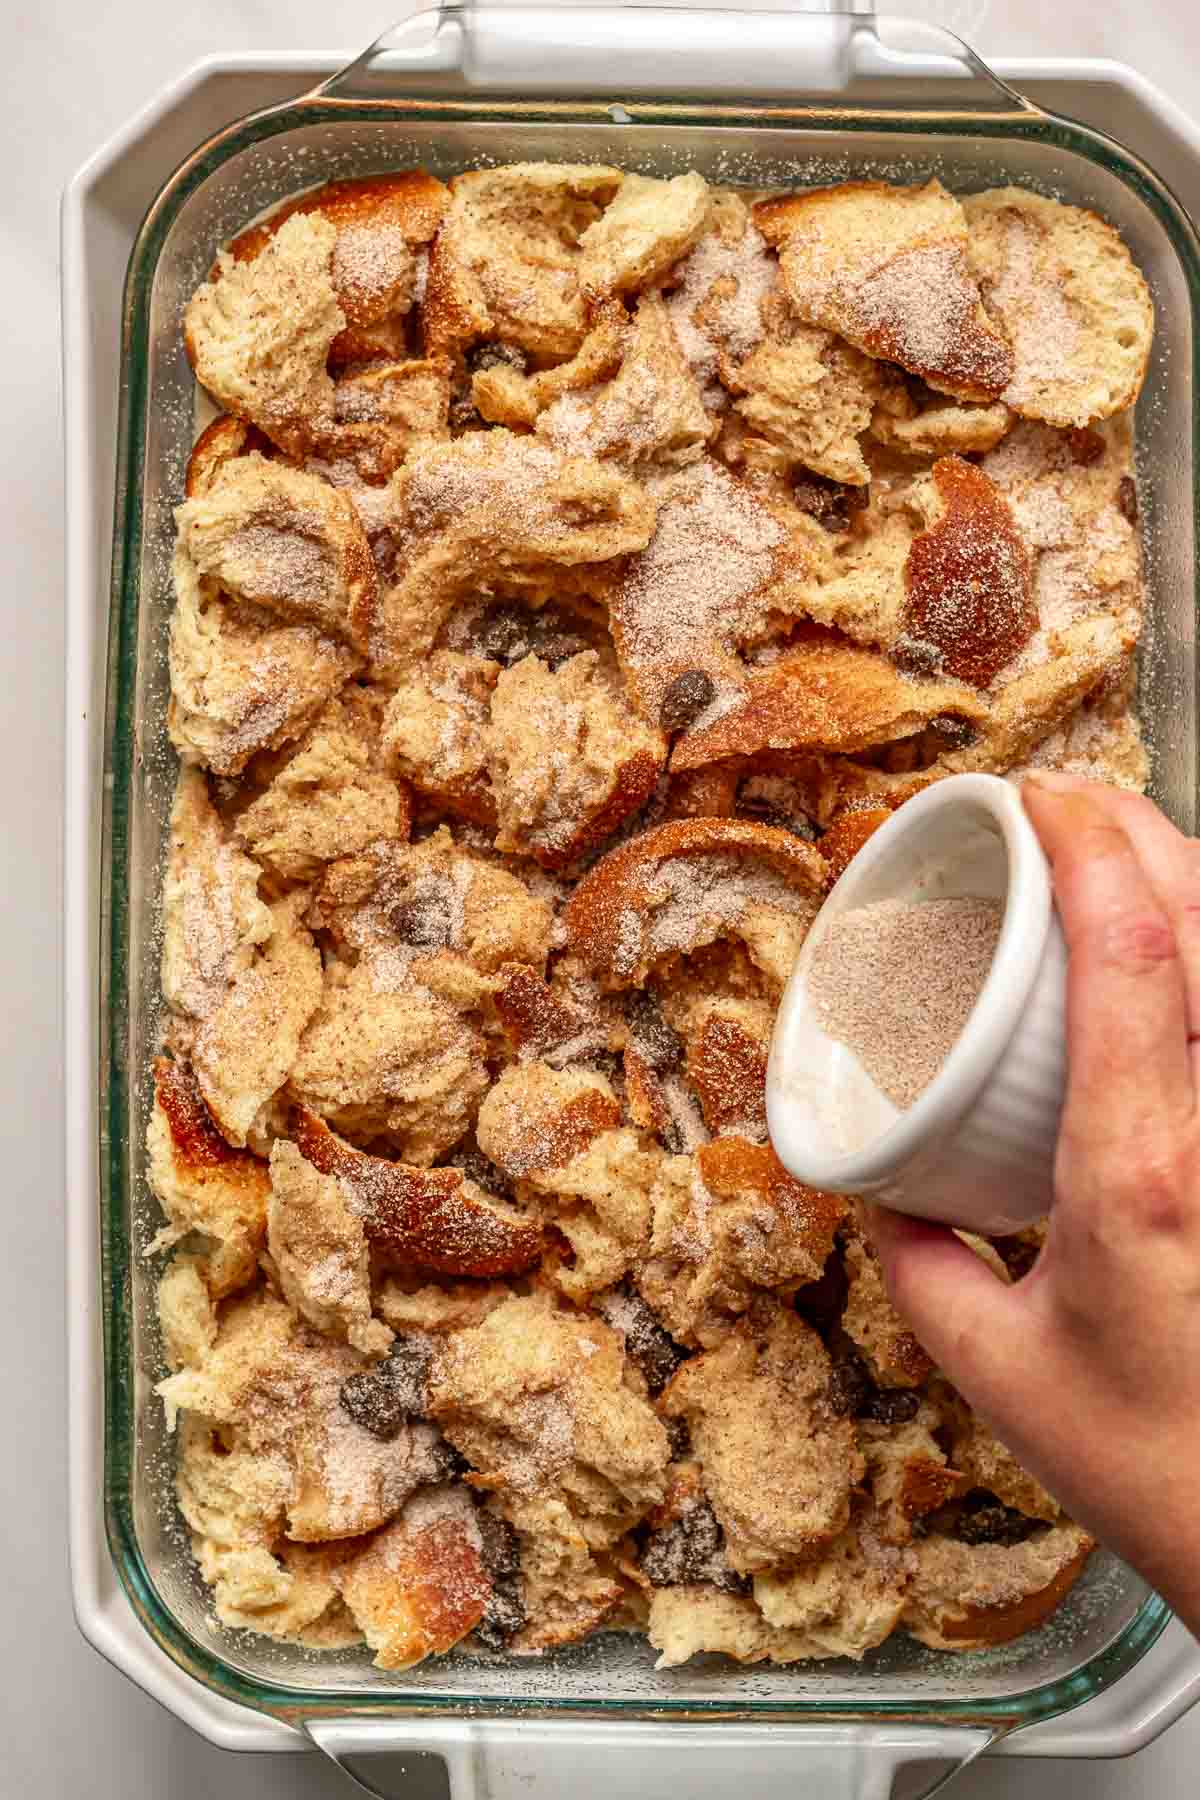 A hand sprinkles cinnamon sugar on top of the bread pudding before baking.